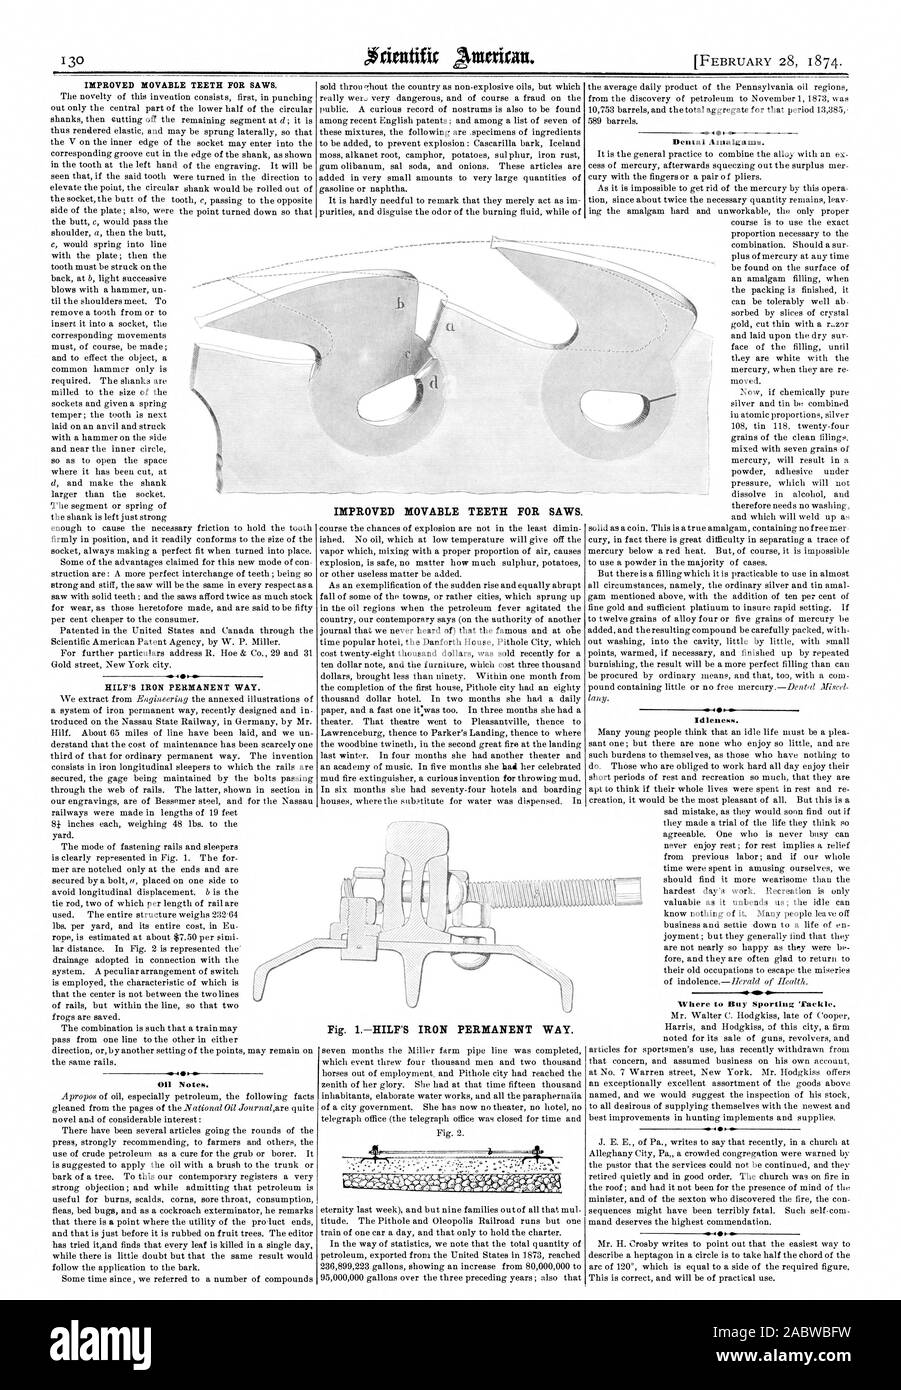 Oil Notes. IMPROVED MOVABLE TEETH FOR SAWS. Fig. 1HILF'S IRON PERMANENT WAY. AI 4 lit Dental Amalgams. Idleness. Where to Buy Sporting Tackle., scientific american, 1874-02-28 Stock Photo